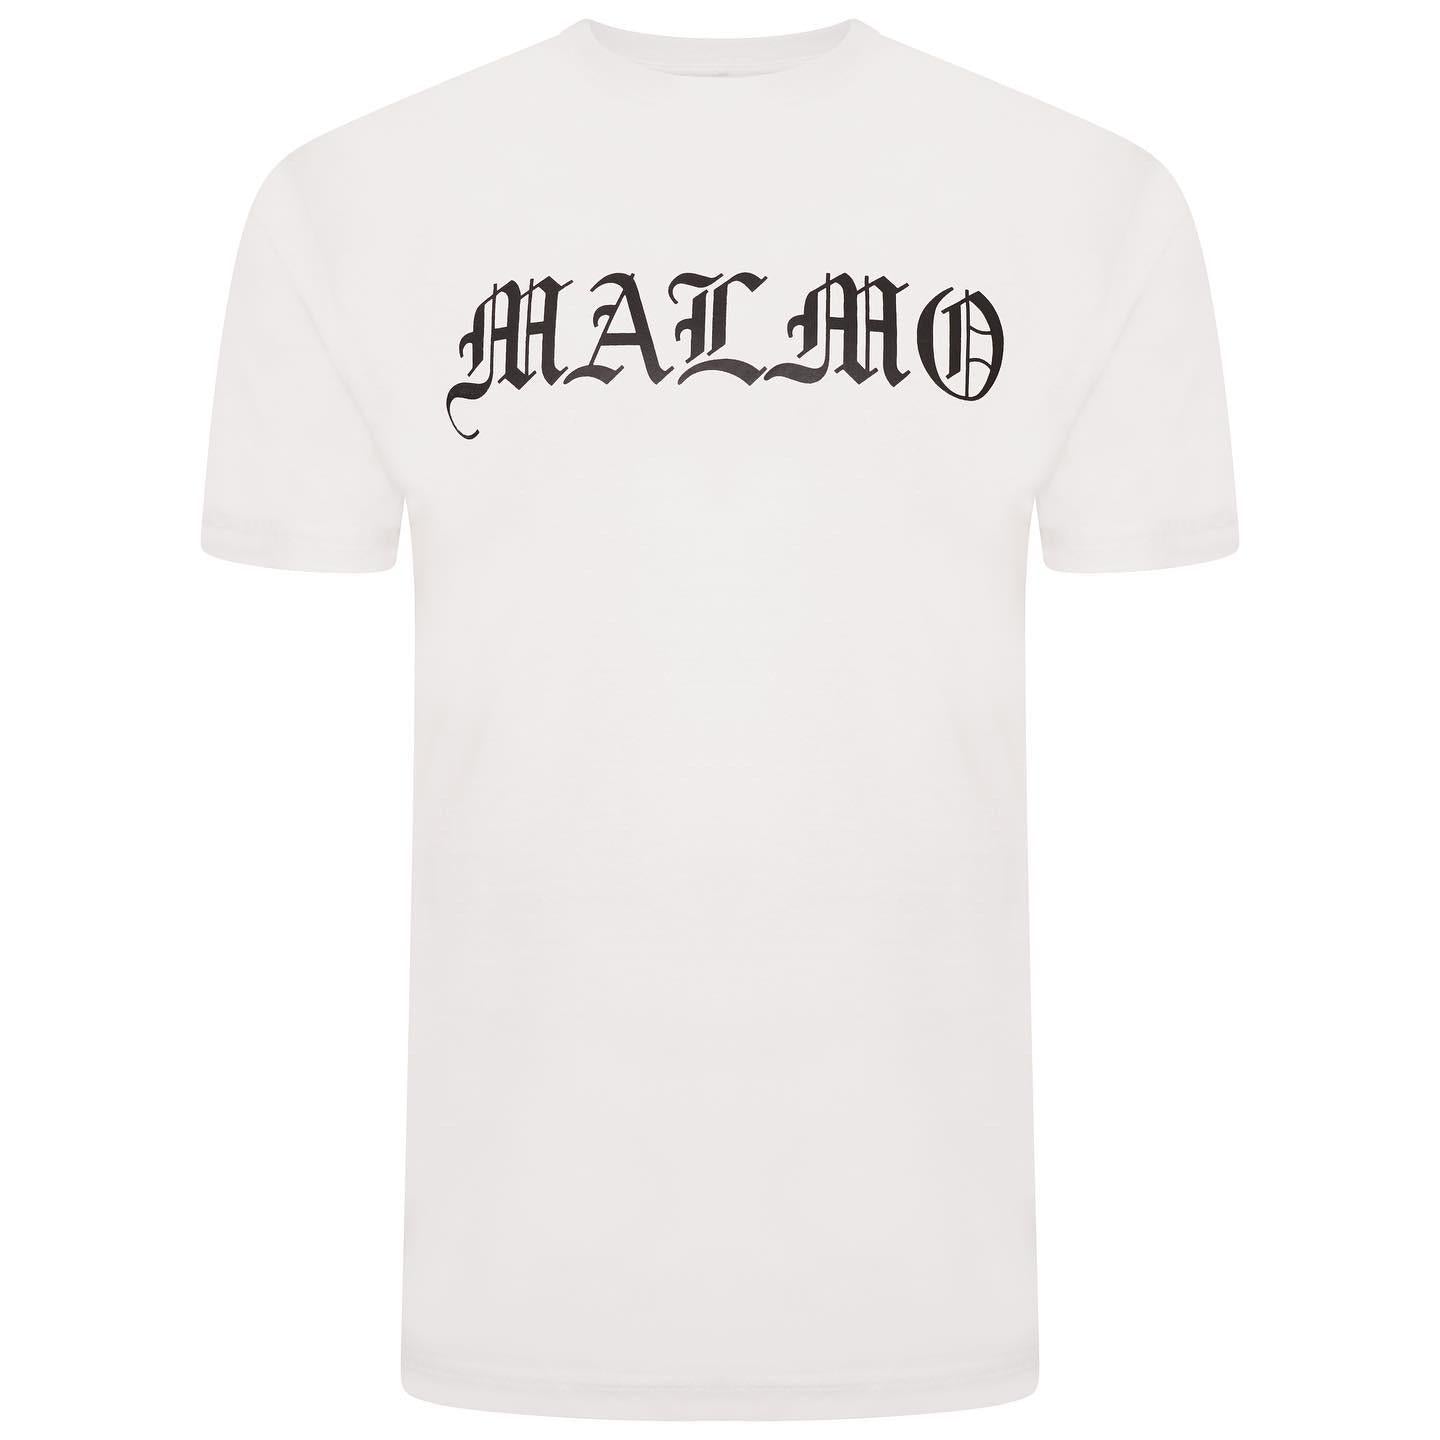 Malmo London Black T-shirt with White drips